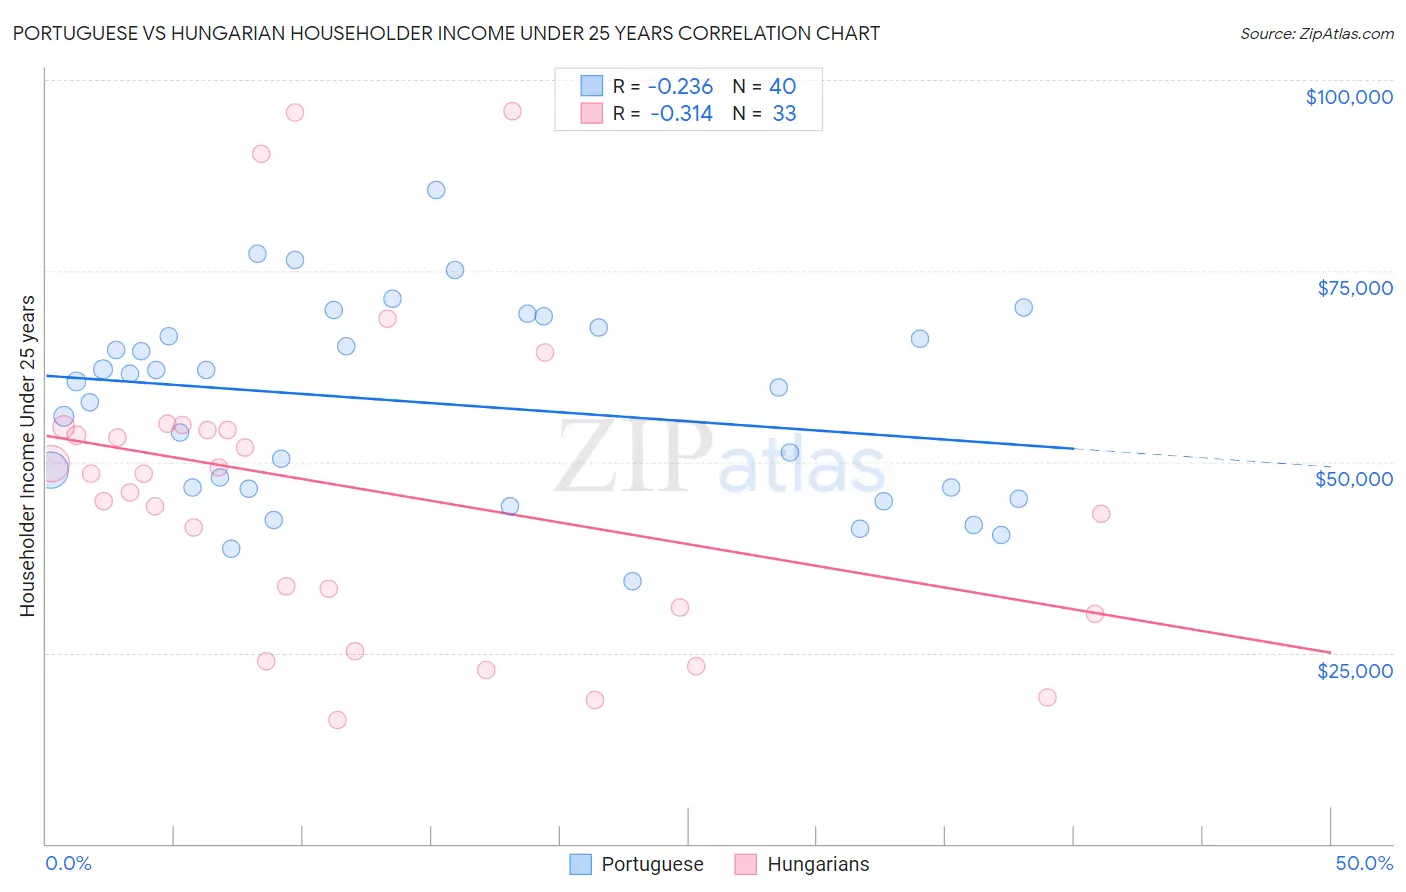 Portuguese vs Hungarian Householder Income Under 25 years